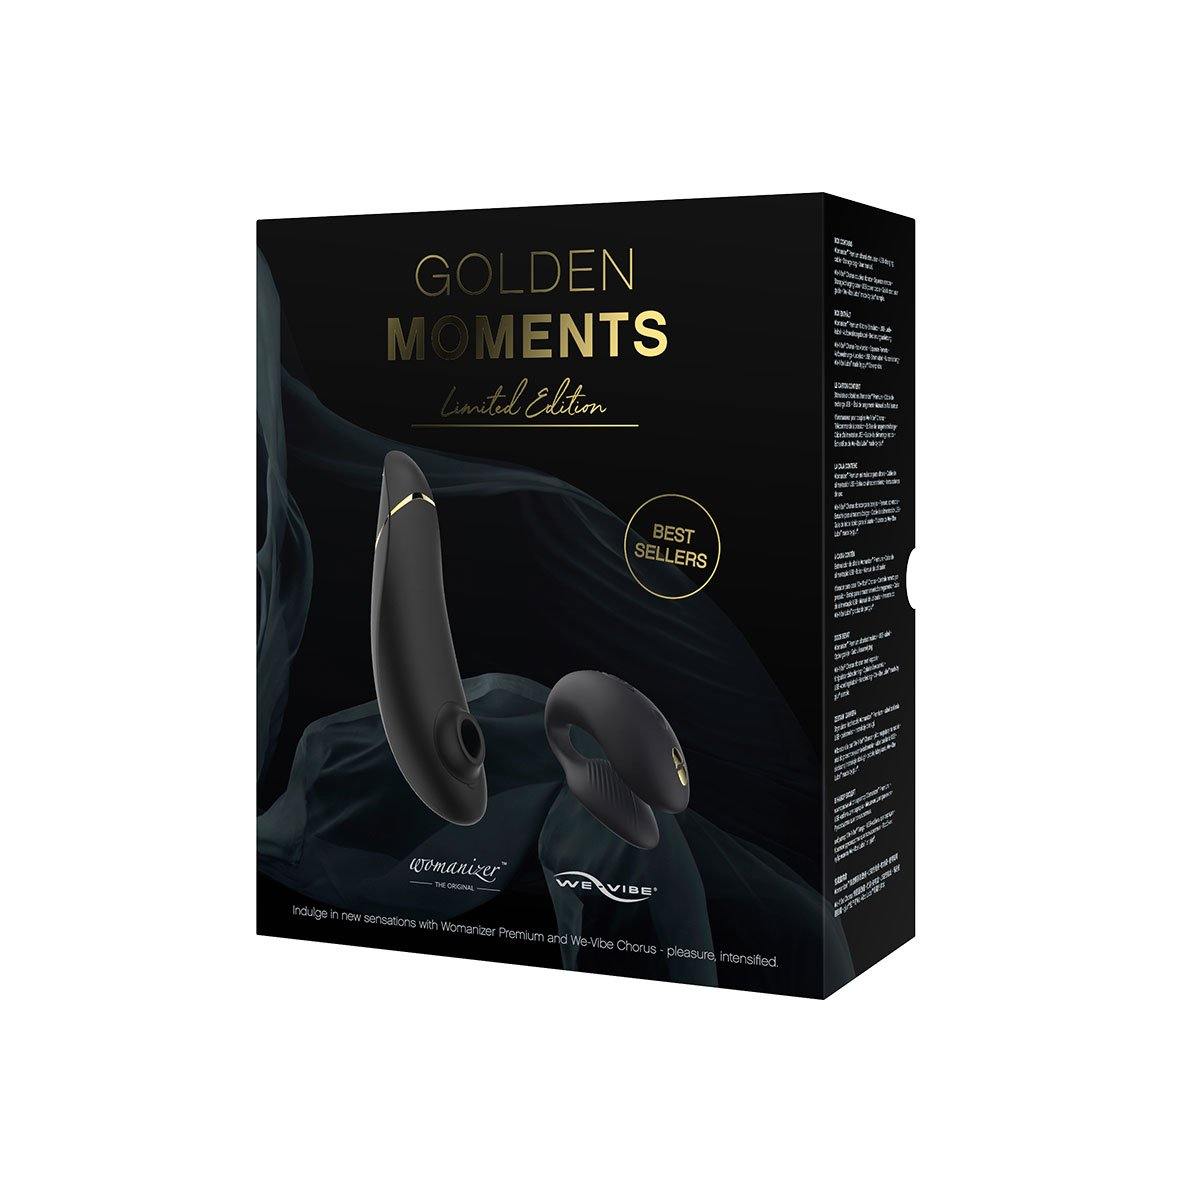 Womanizer And We-vibe Golden Moments - Buy At Luxury Toy X - Free 3-Day Shipping